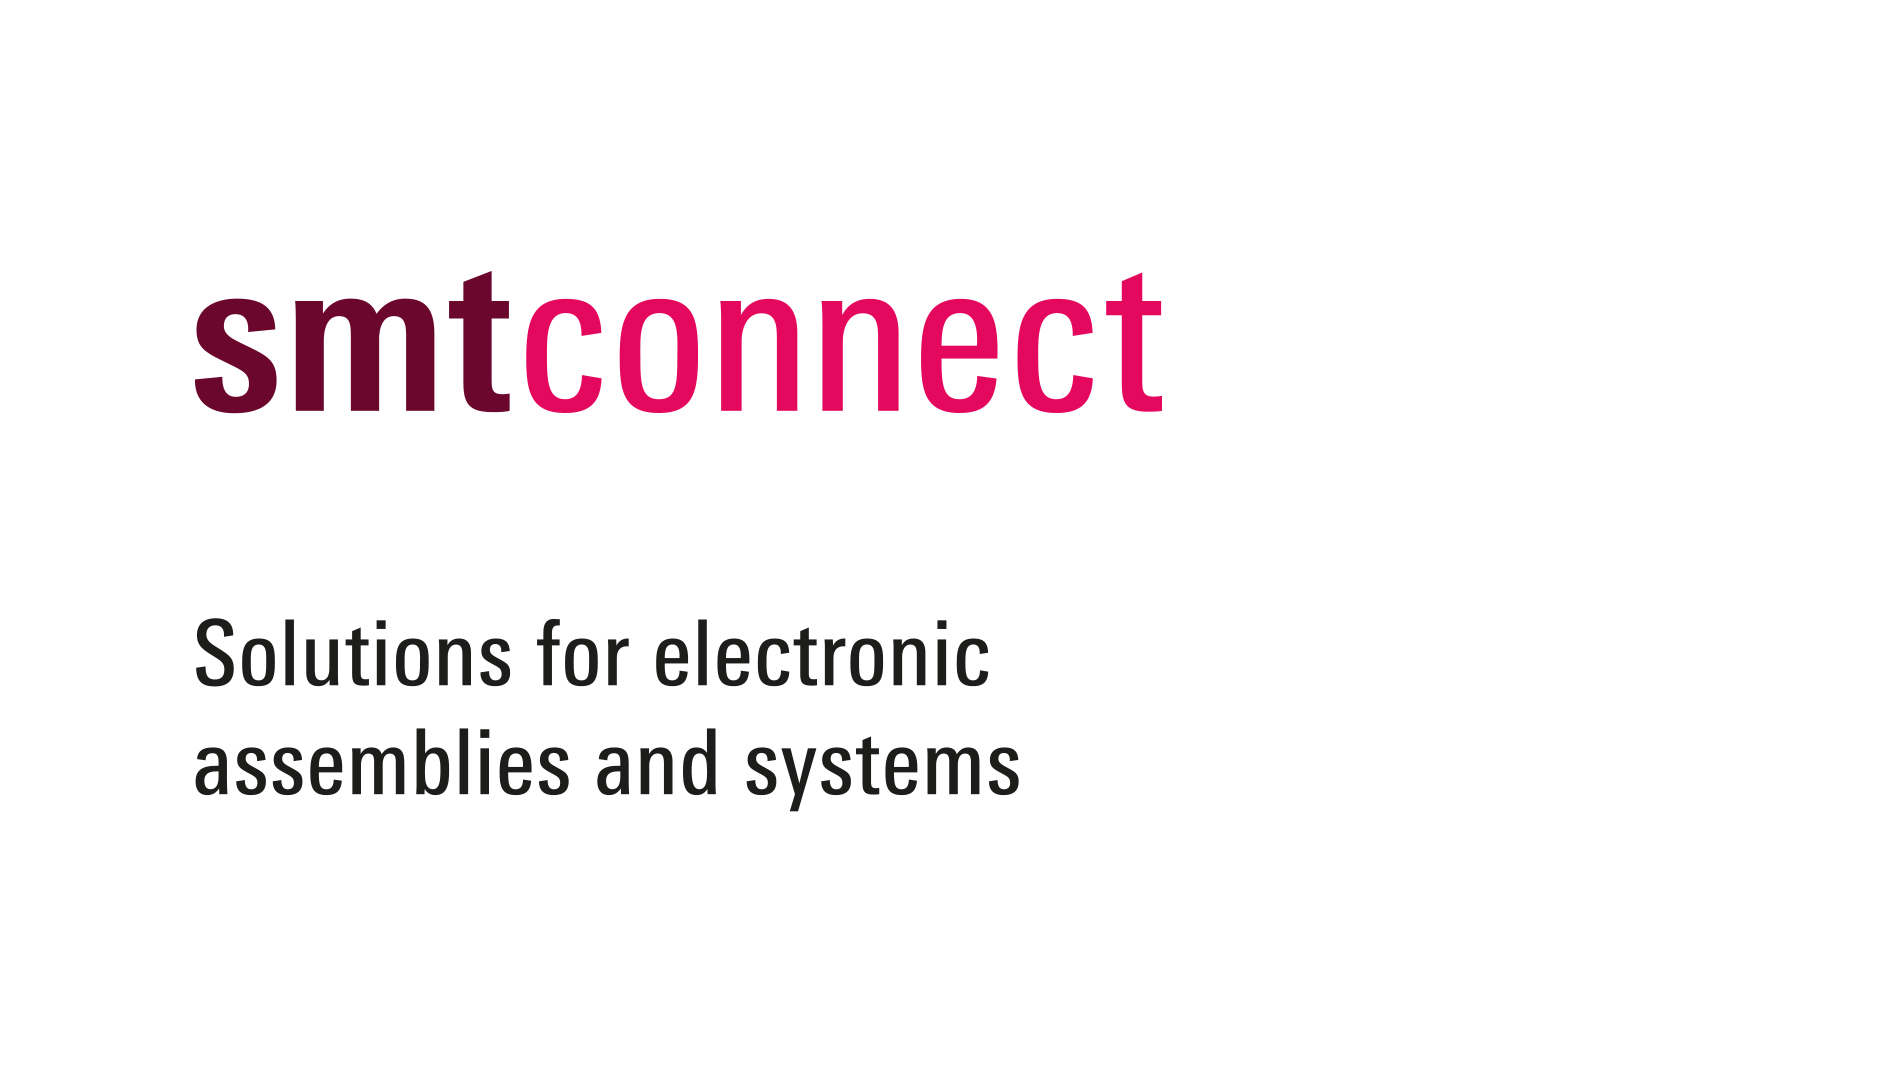 Logo of the SMTconnect